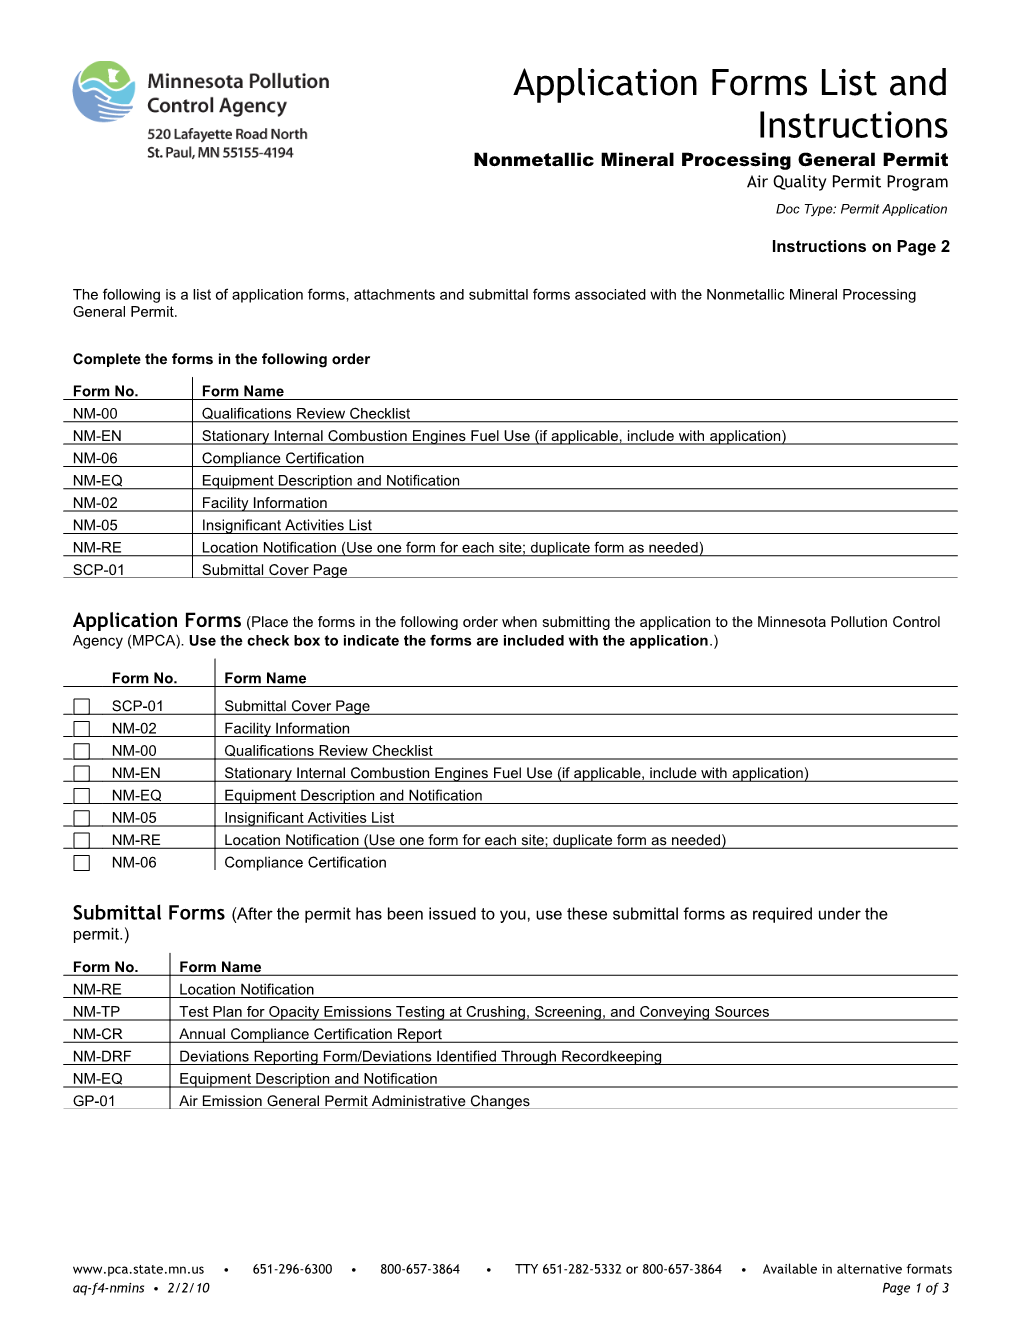 NM-INS Forms Master List and Instructions - Nonmetallic Mineral Processing General Permit